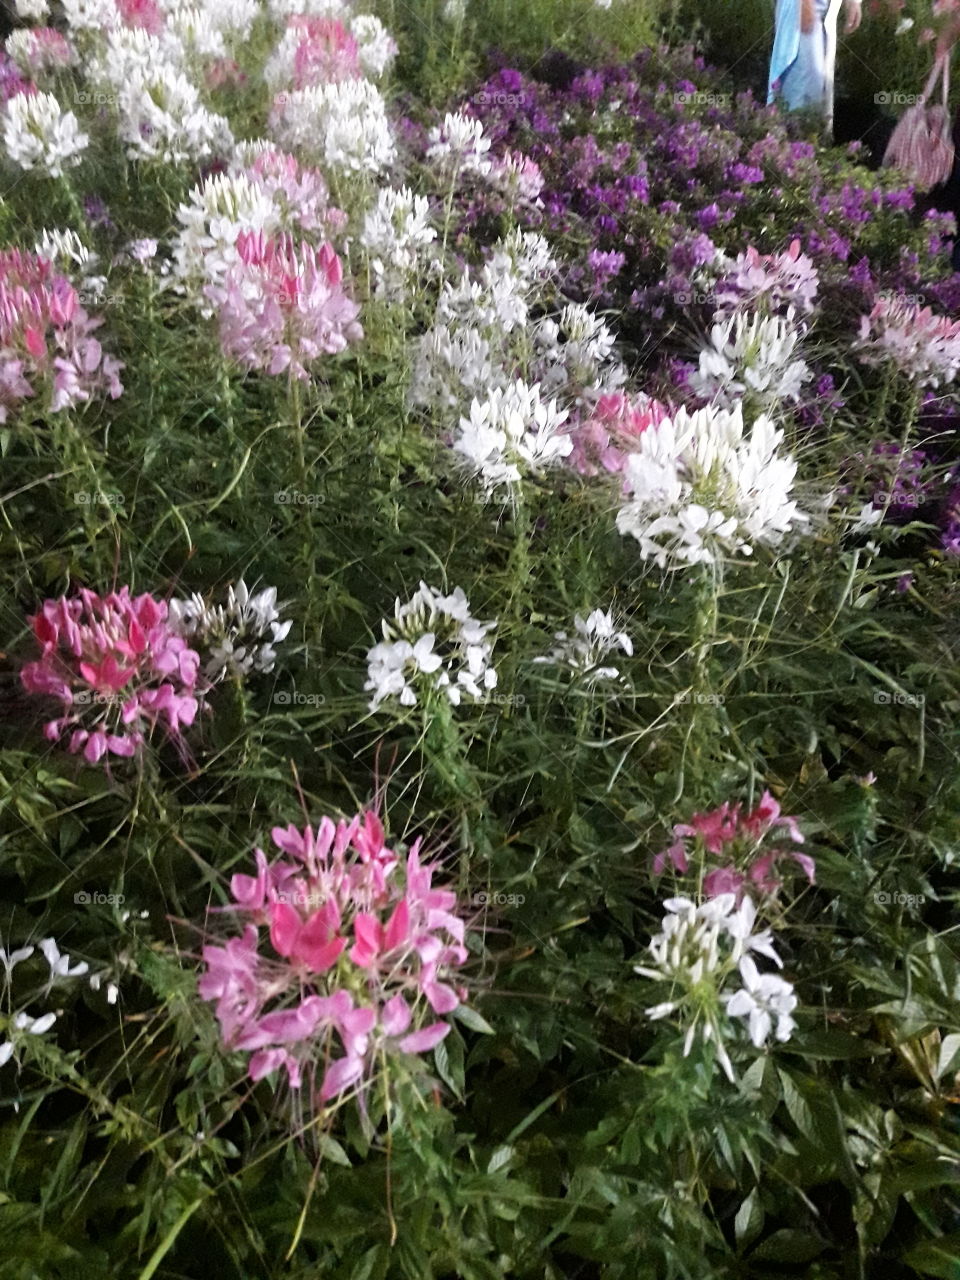 the field of pink and white flowers.